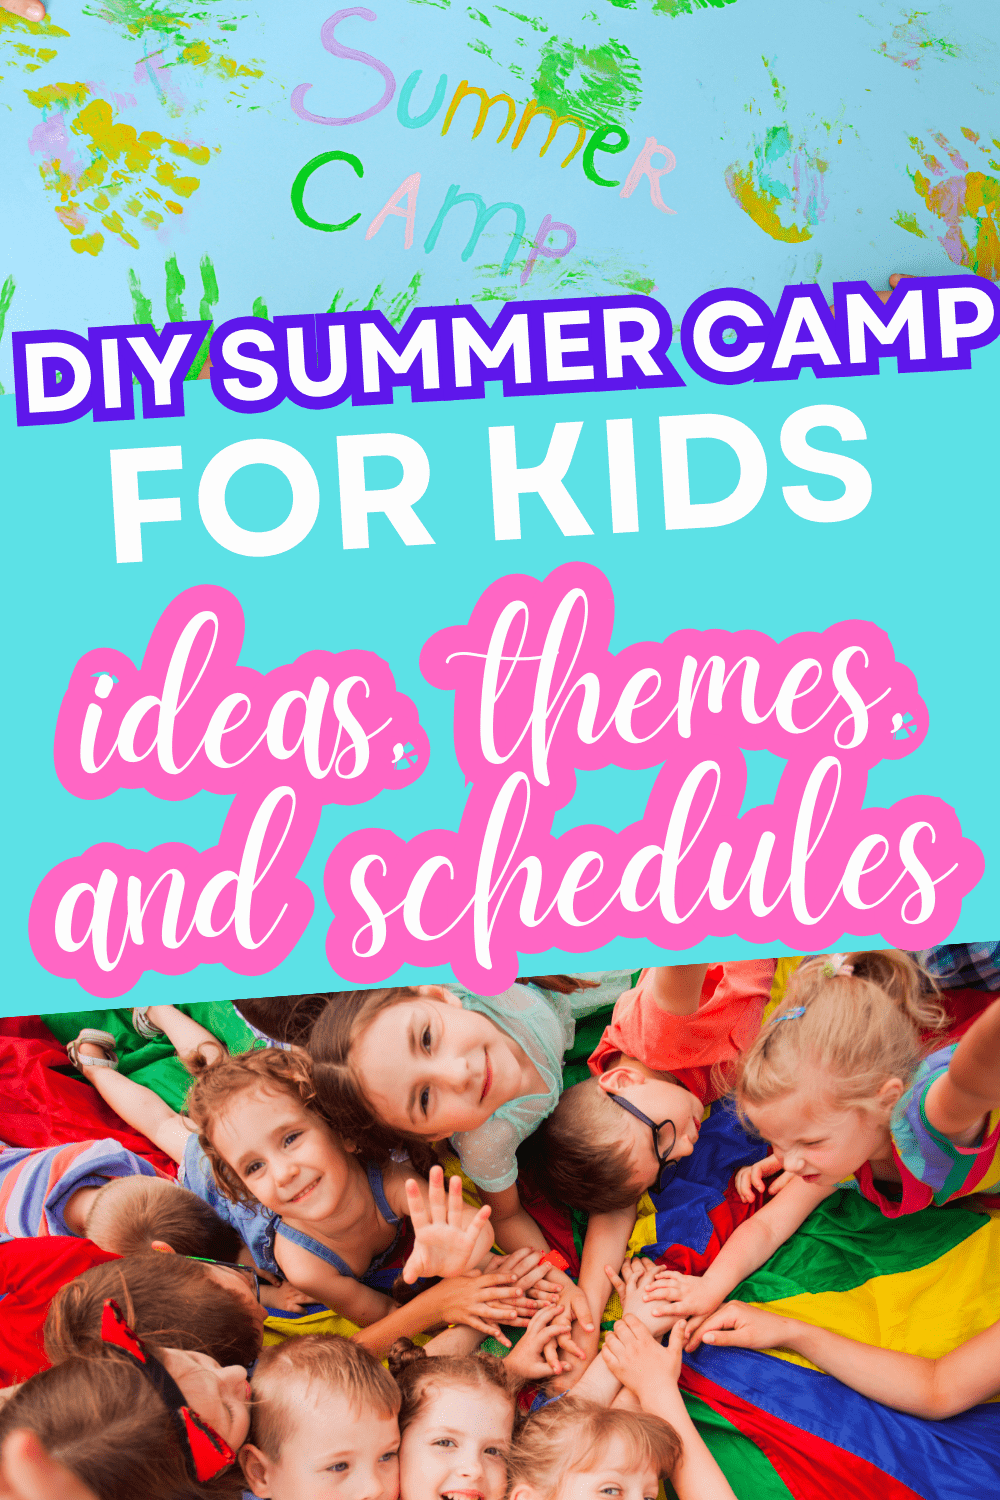 DIY summer camp for kids ideas, themes, and schedules Pinterest pin.